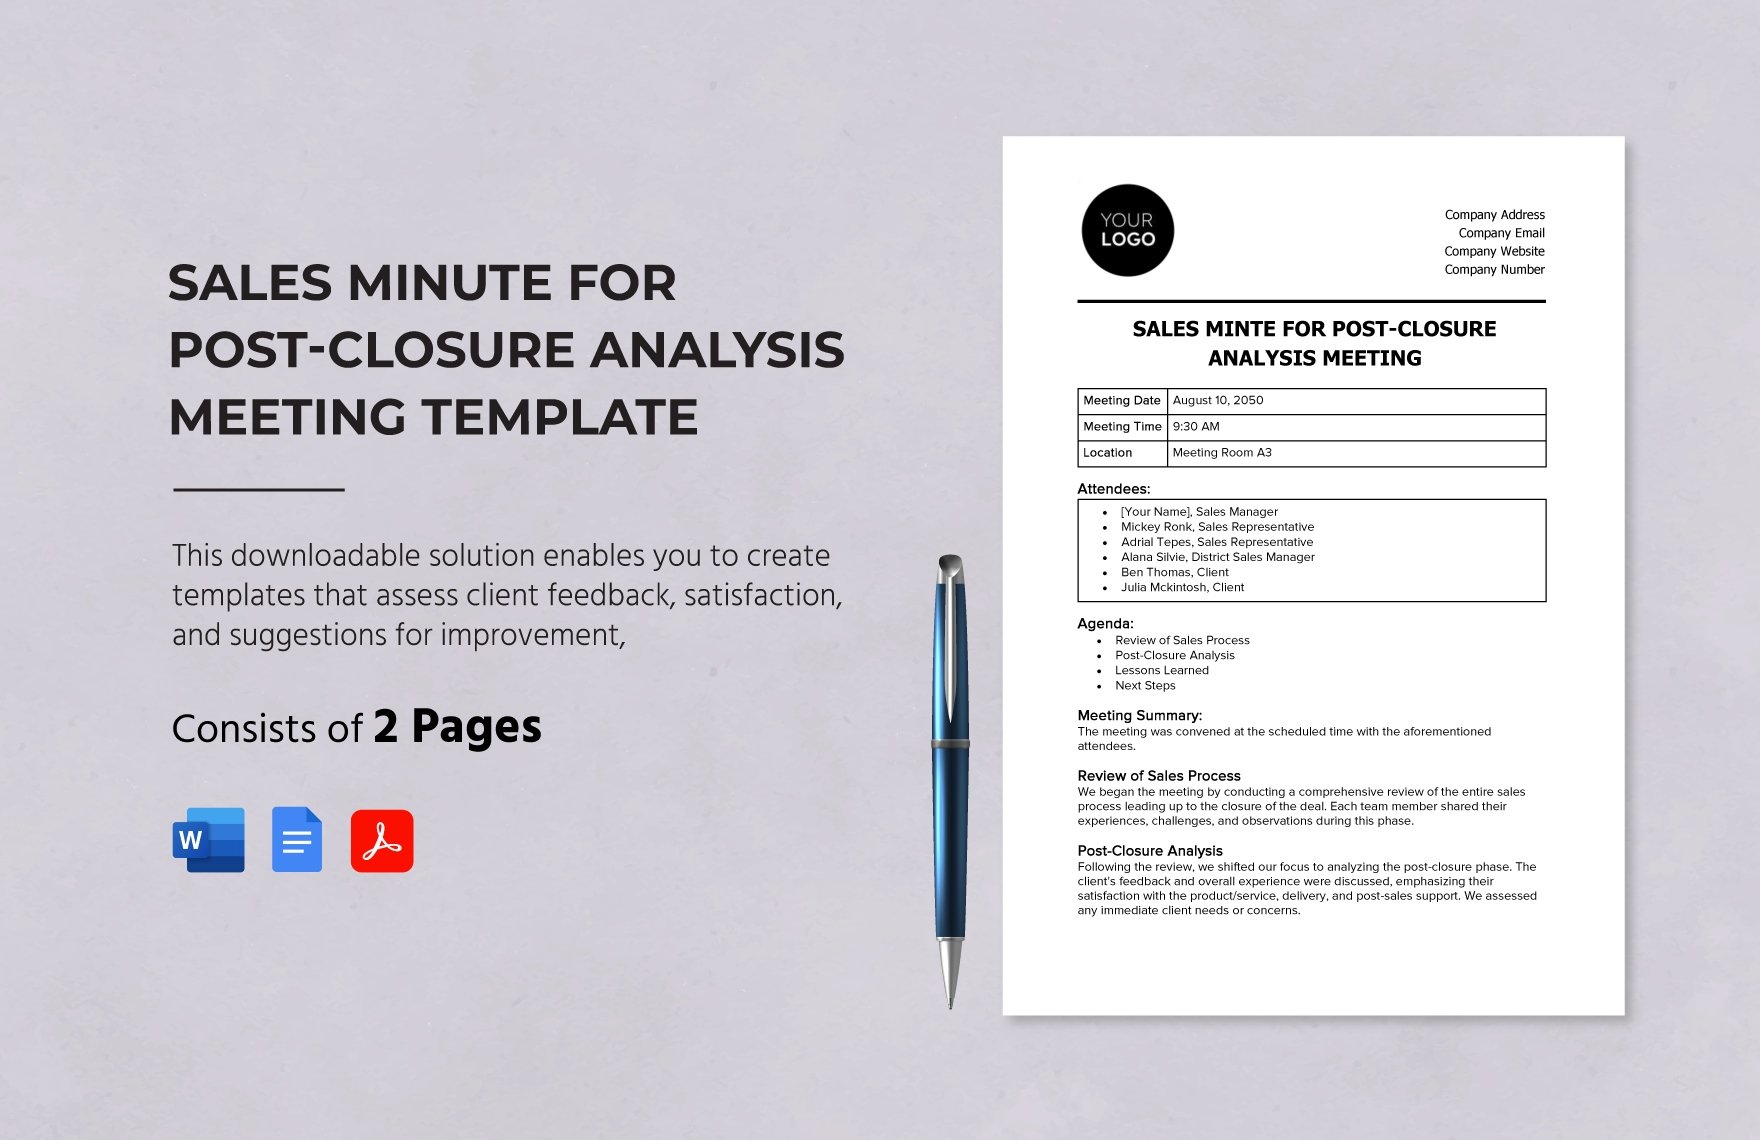 Sales Minute for Post-Closure Analysis Meeting Template